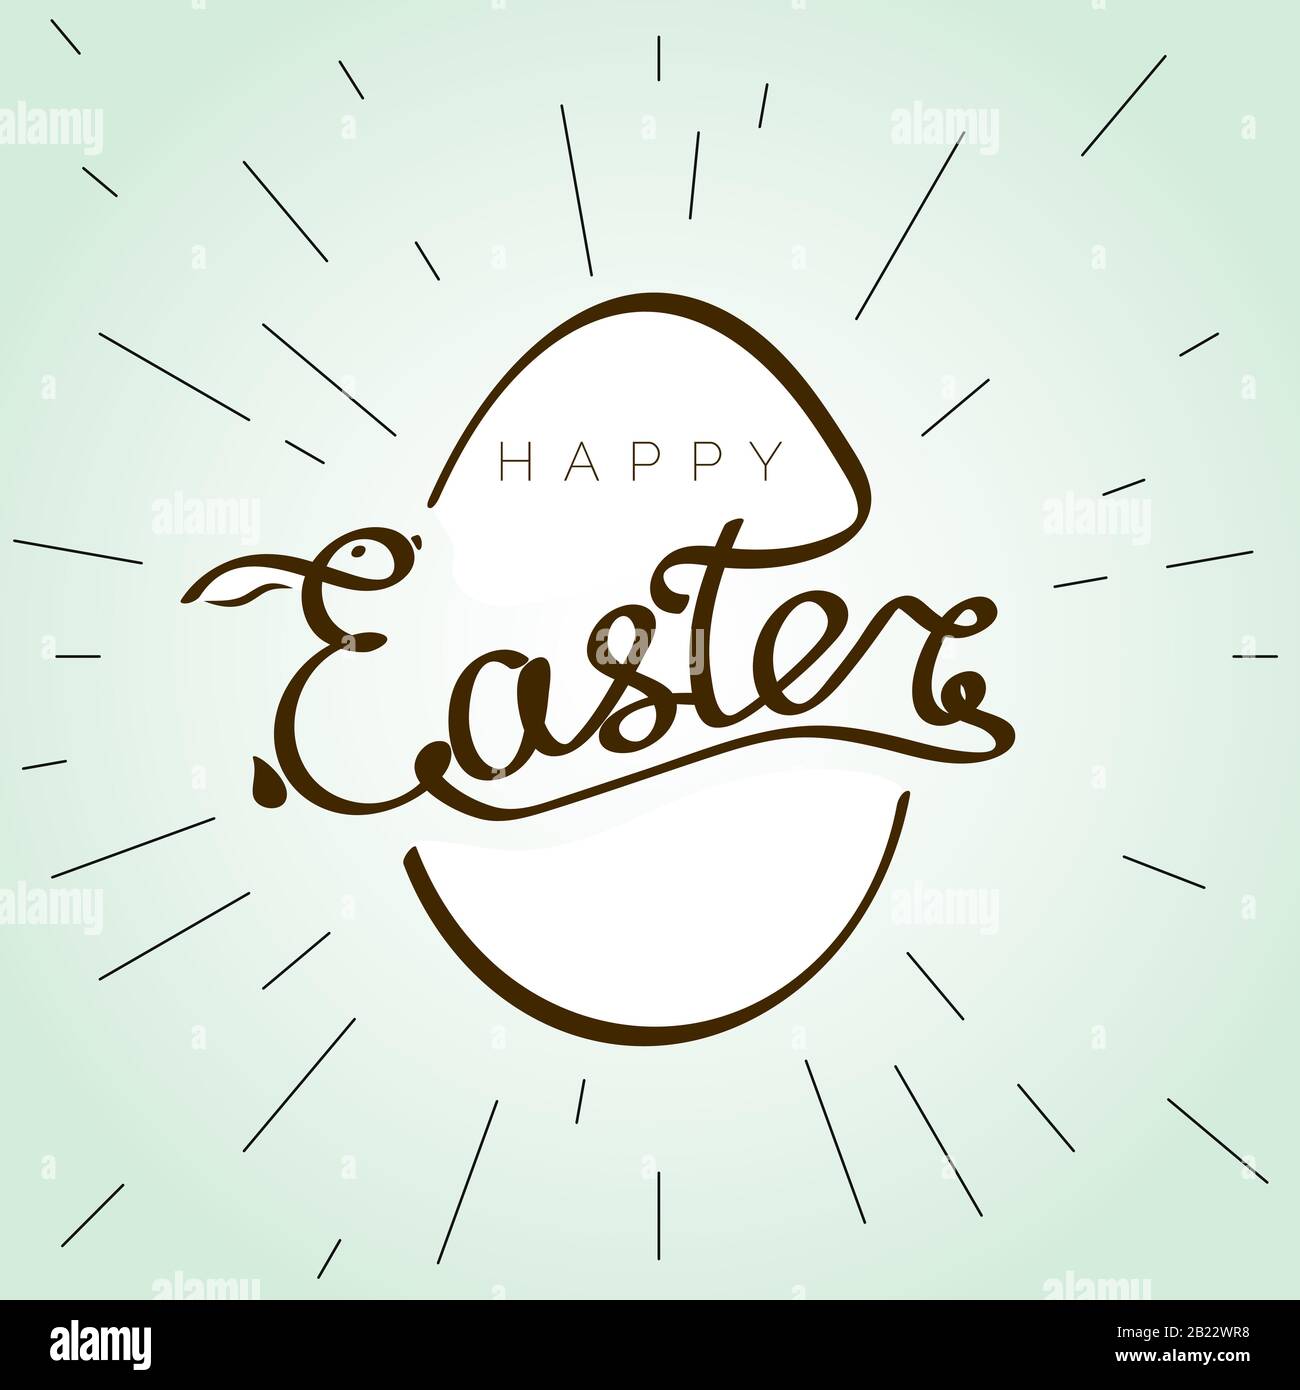 Happy Easter with rebbit ears silhouette behind egg. Christian biggest holiday banner in retro style. Vector Stock Vector